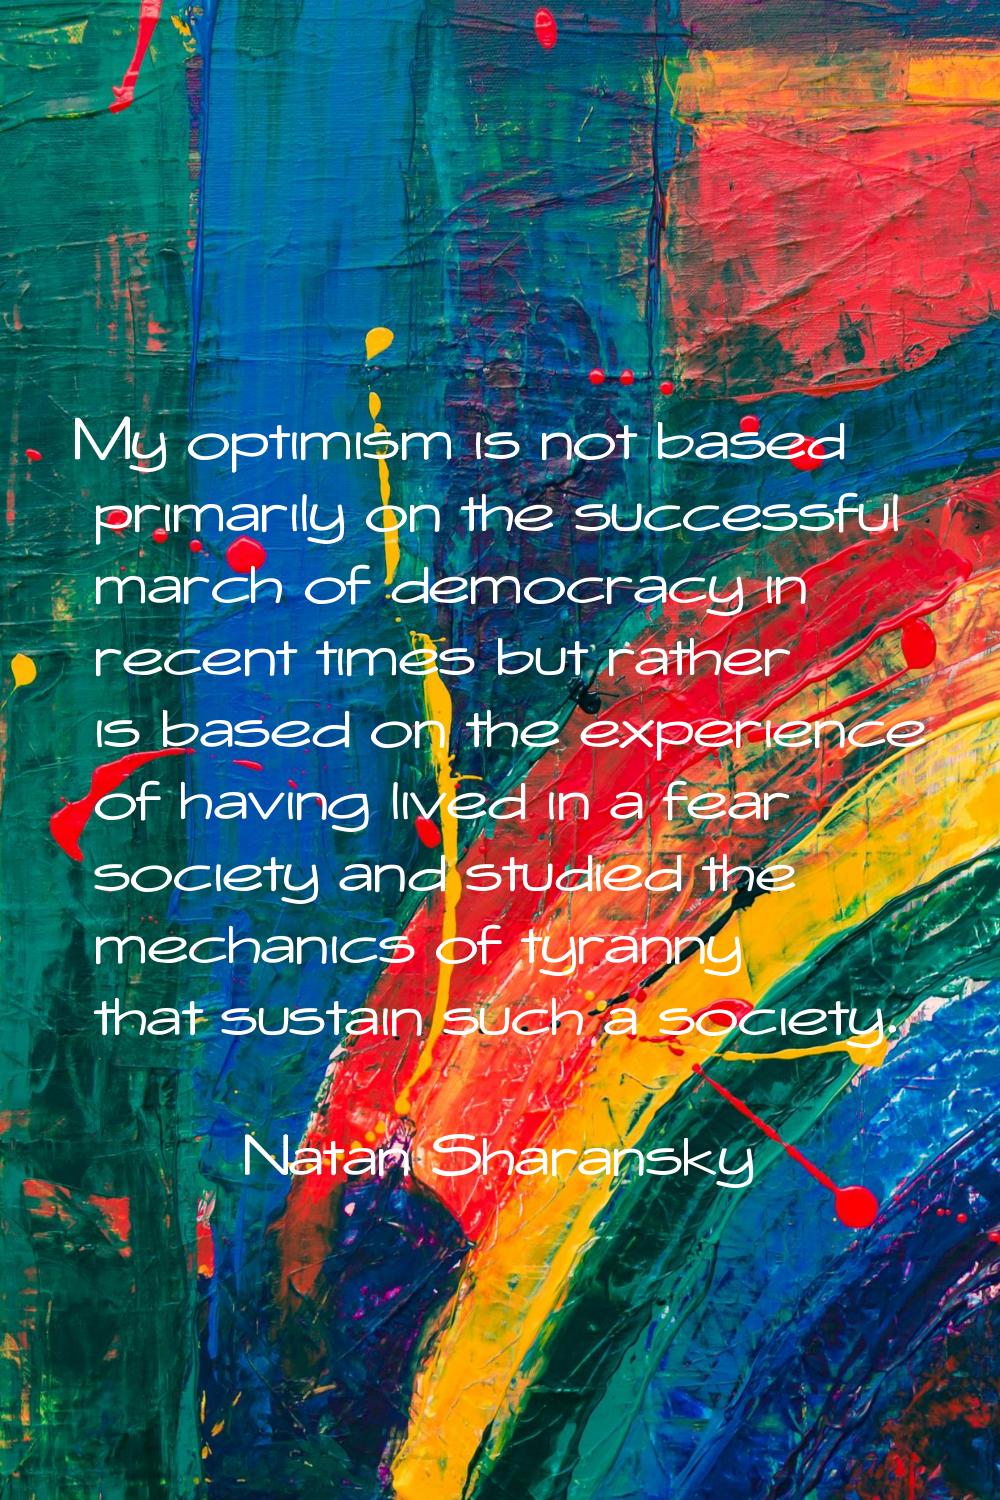 My optimism is not based primarily on the successful march of democracy in recent times but rather 